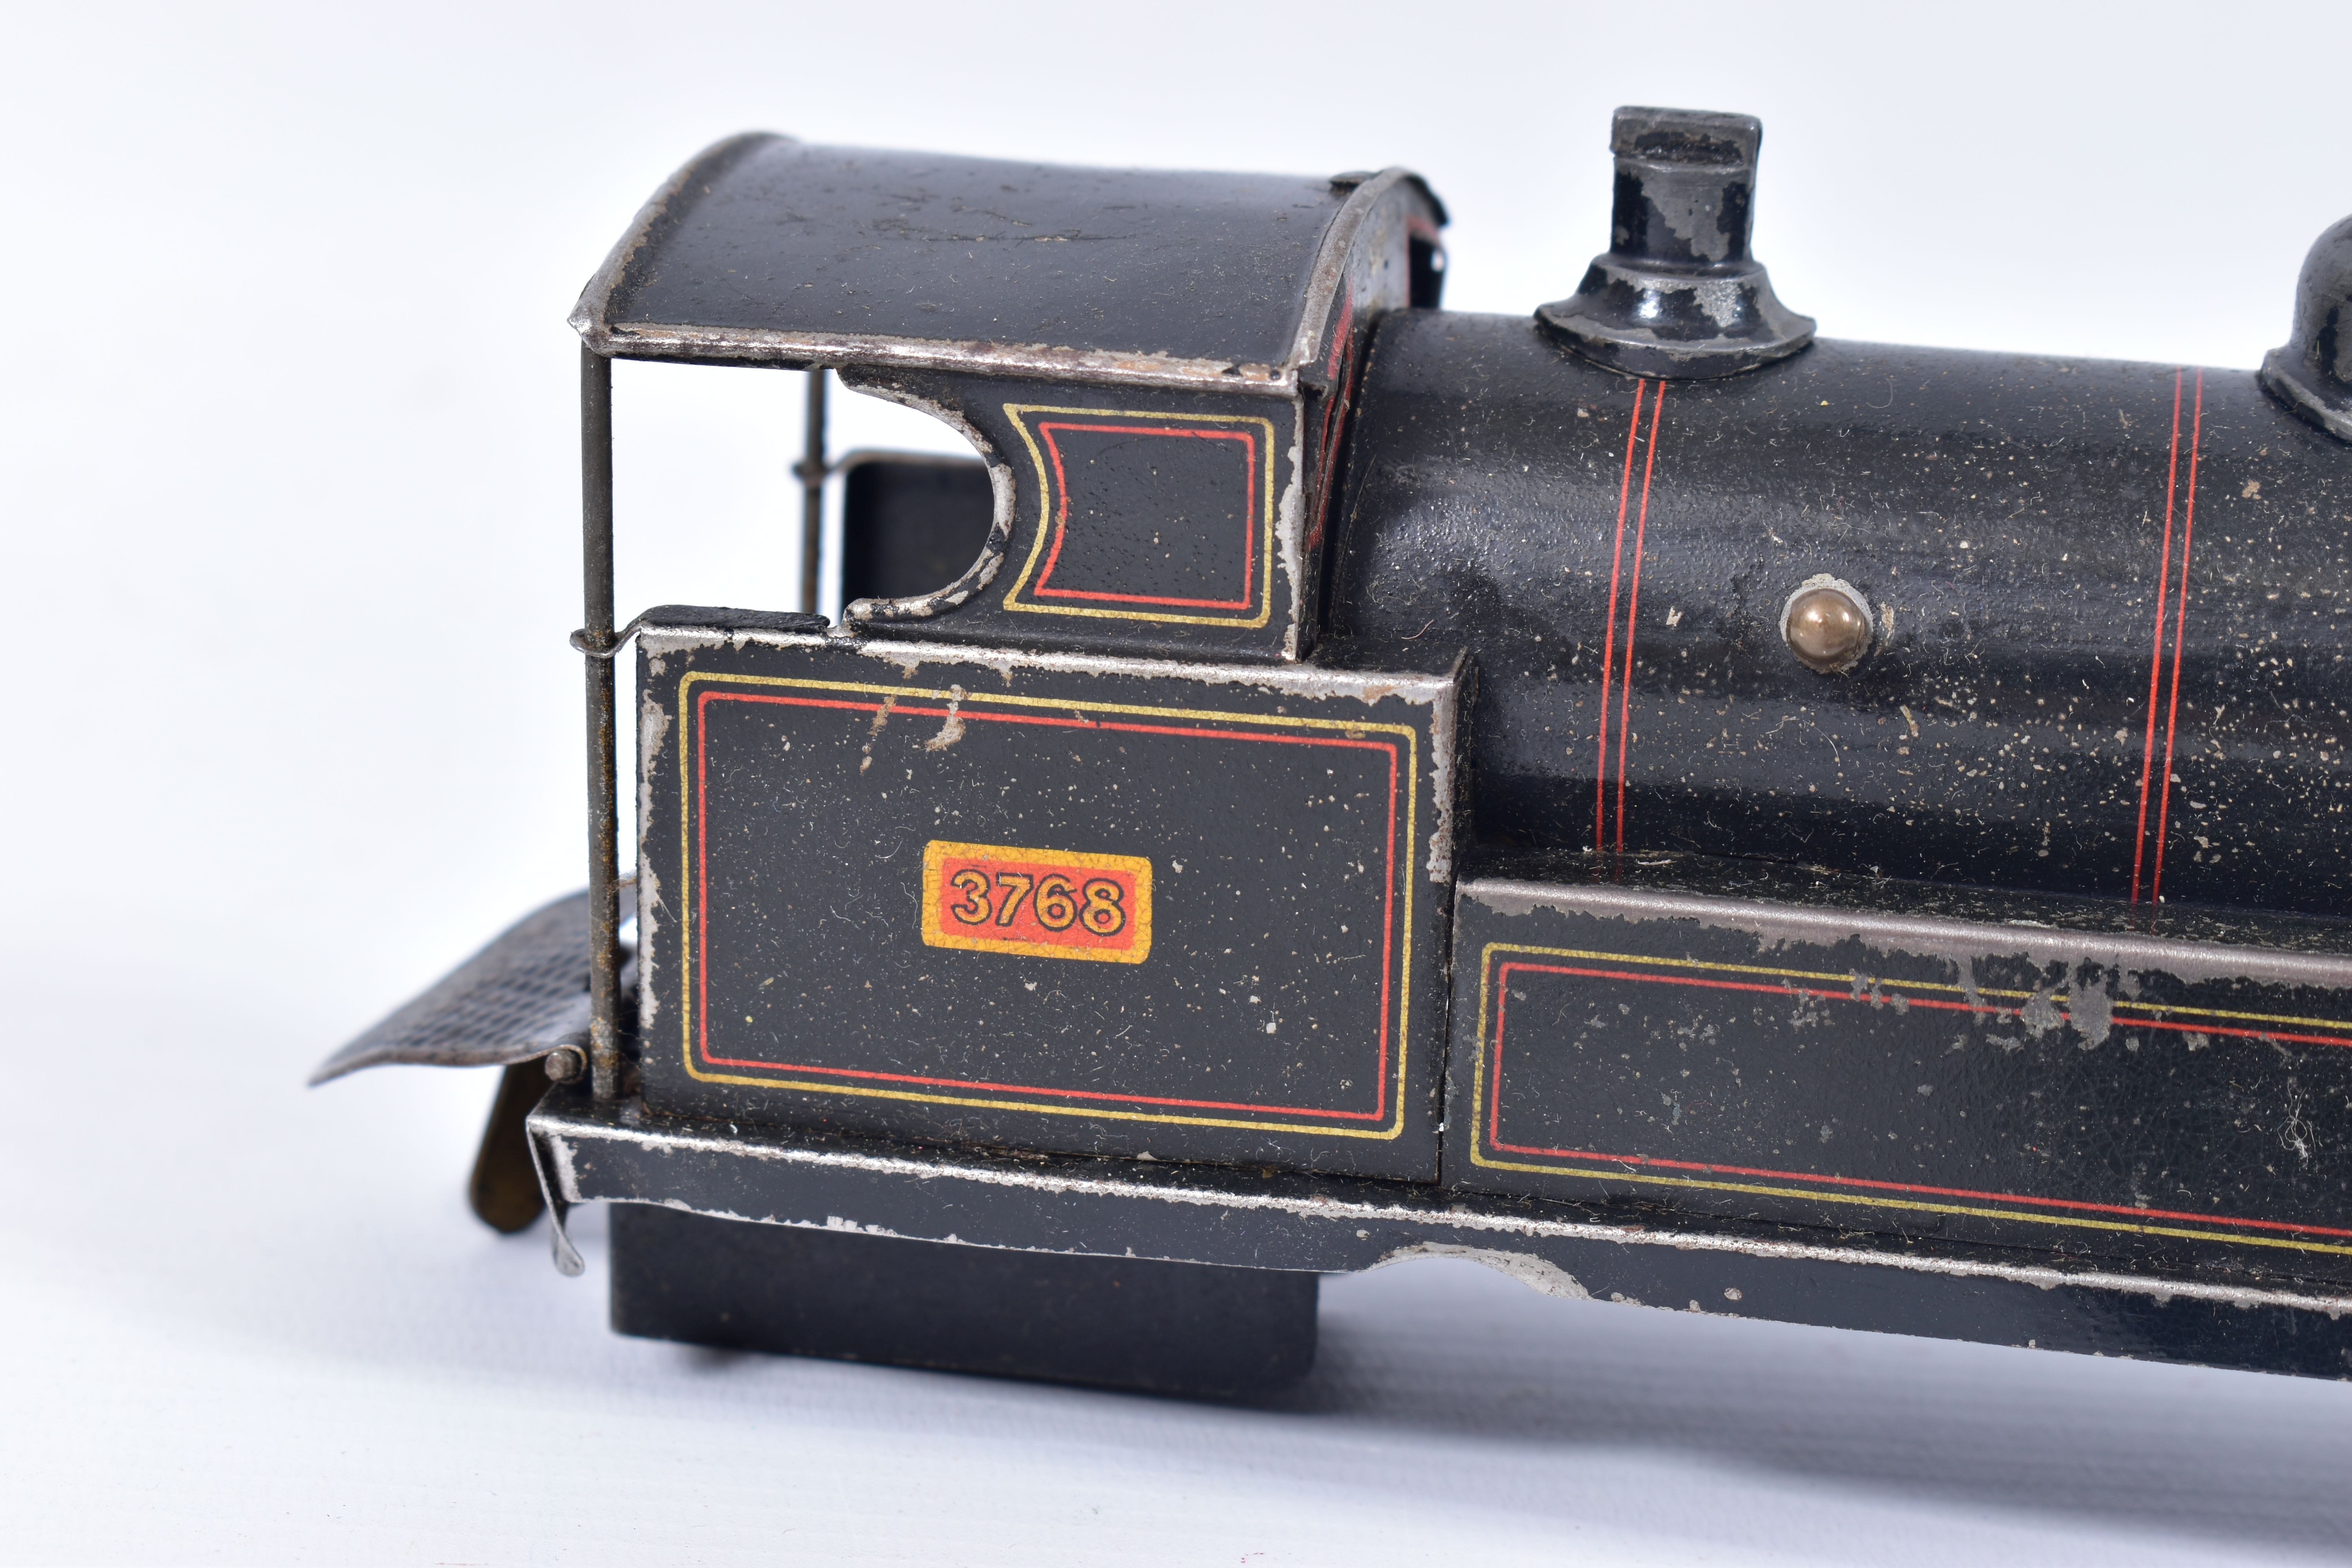 A BING CLOCKWORK O GAUGE 0-4-0 LOCOMOTIVE AND TENDER, No.3768, lined black livery, dismantled and in - Image 2 of 4